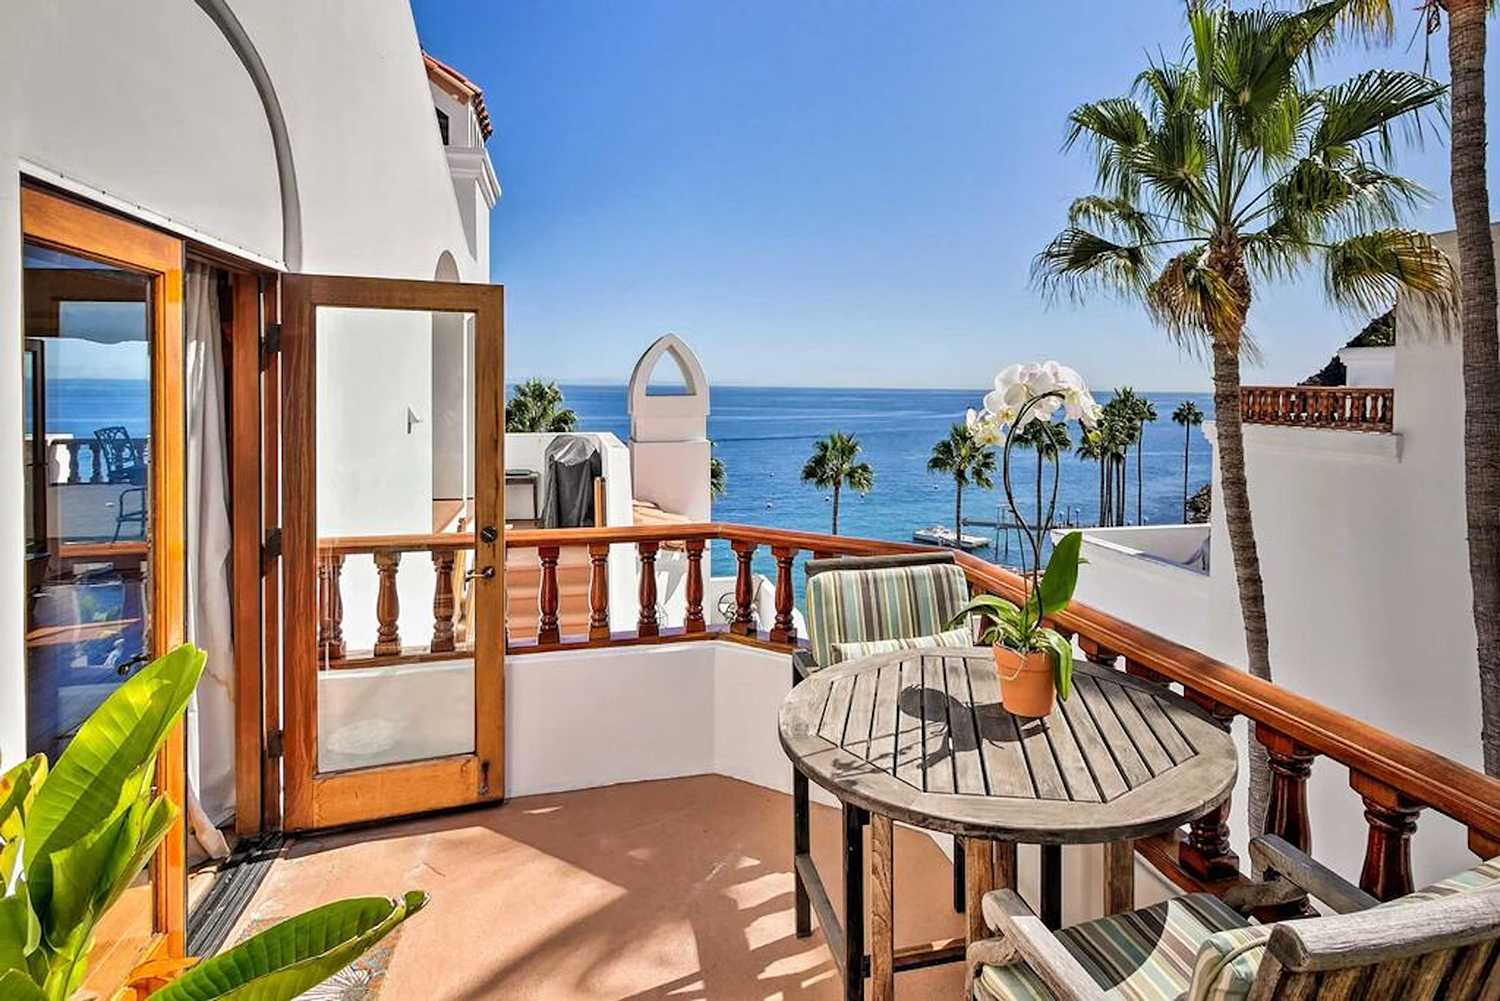 Patio view of the Pacific Ocean from a selection of California Coastal Rentals called Paradise Cove on Catalina Island, California.